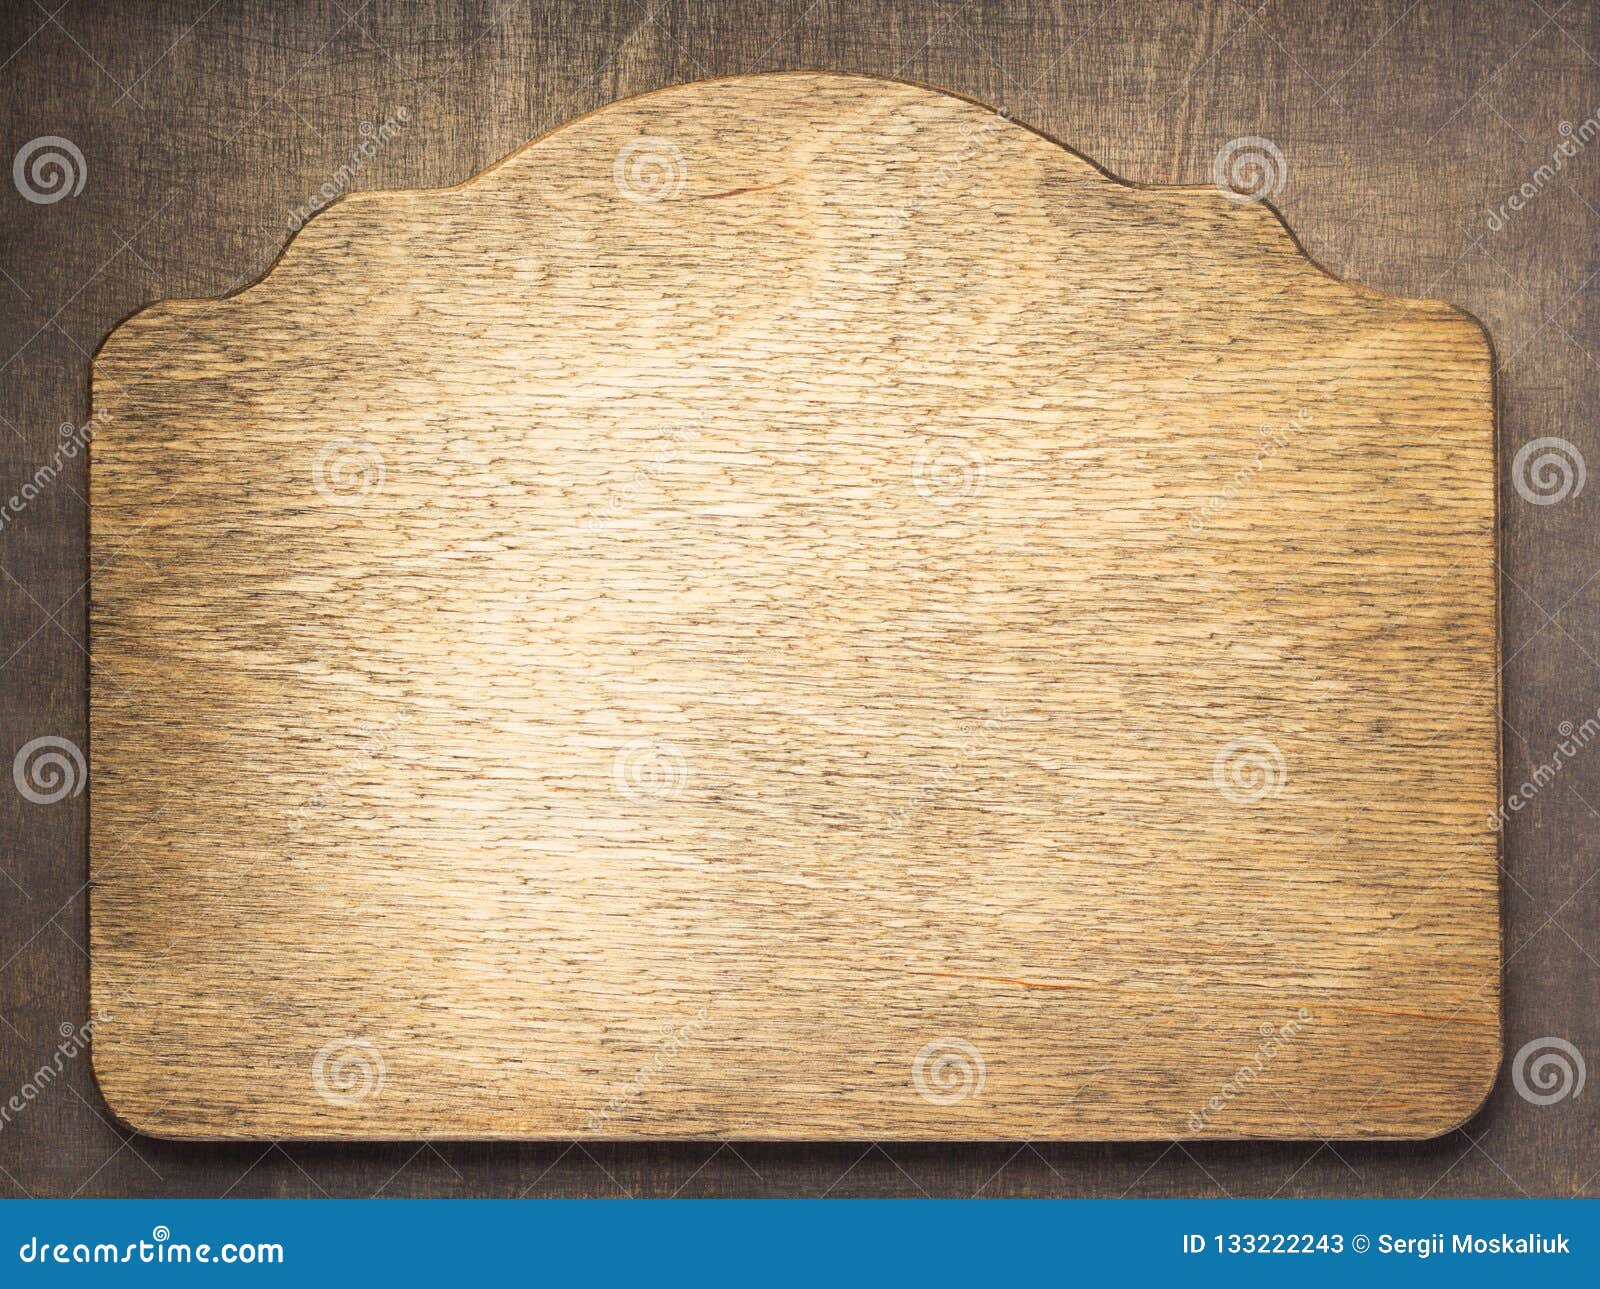 Wooden Sign Board Background Stock Image - Image of banner, shield:  133222243